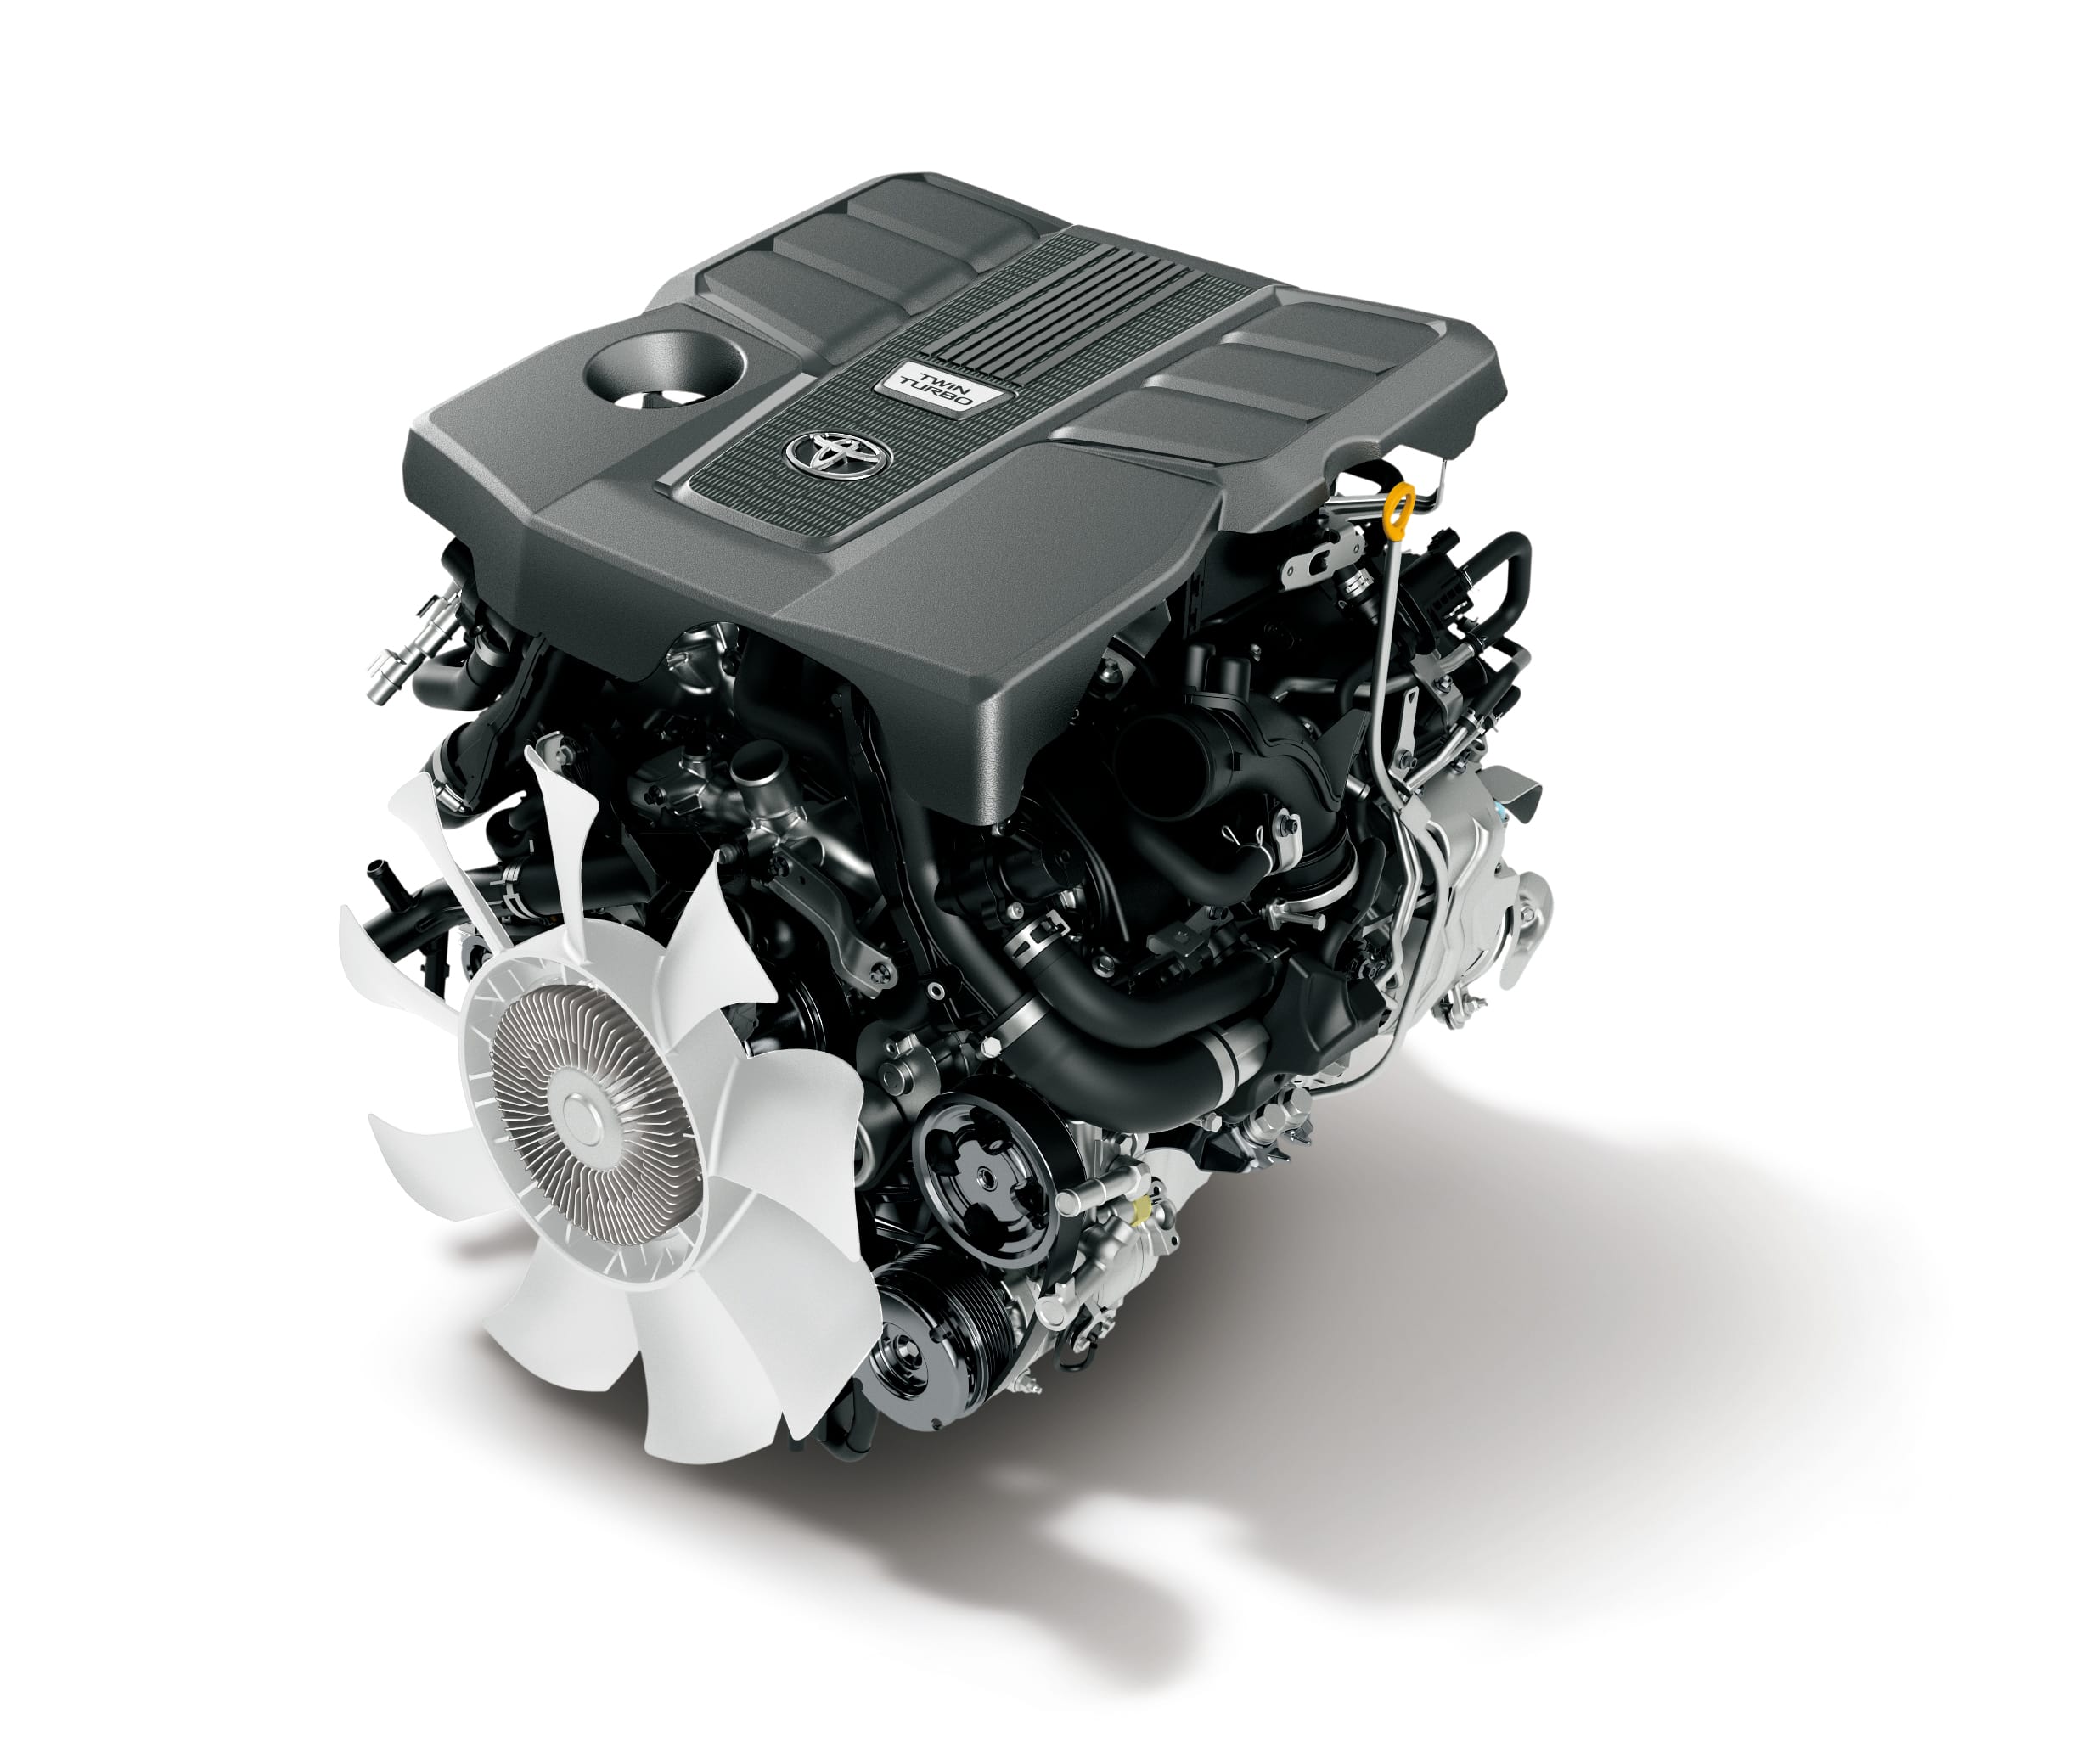 3.5L V6 twin-turbo diesel engine on the Land Cruiser 300